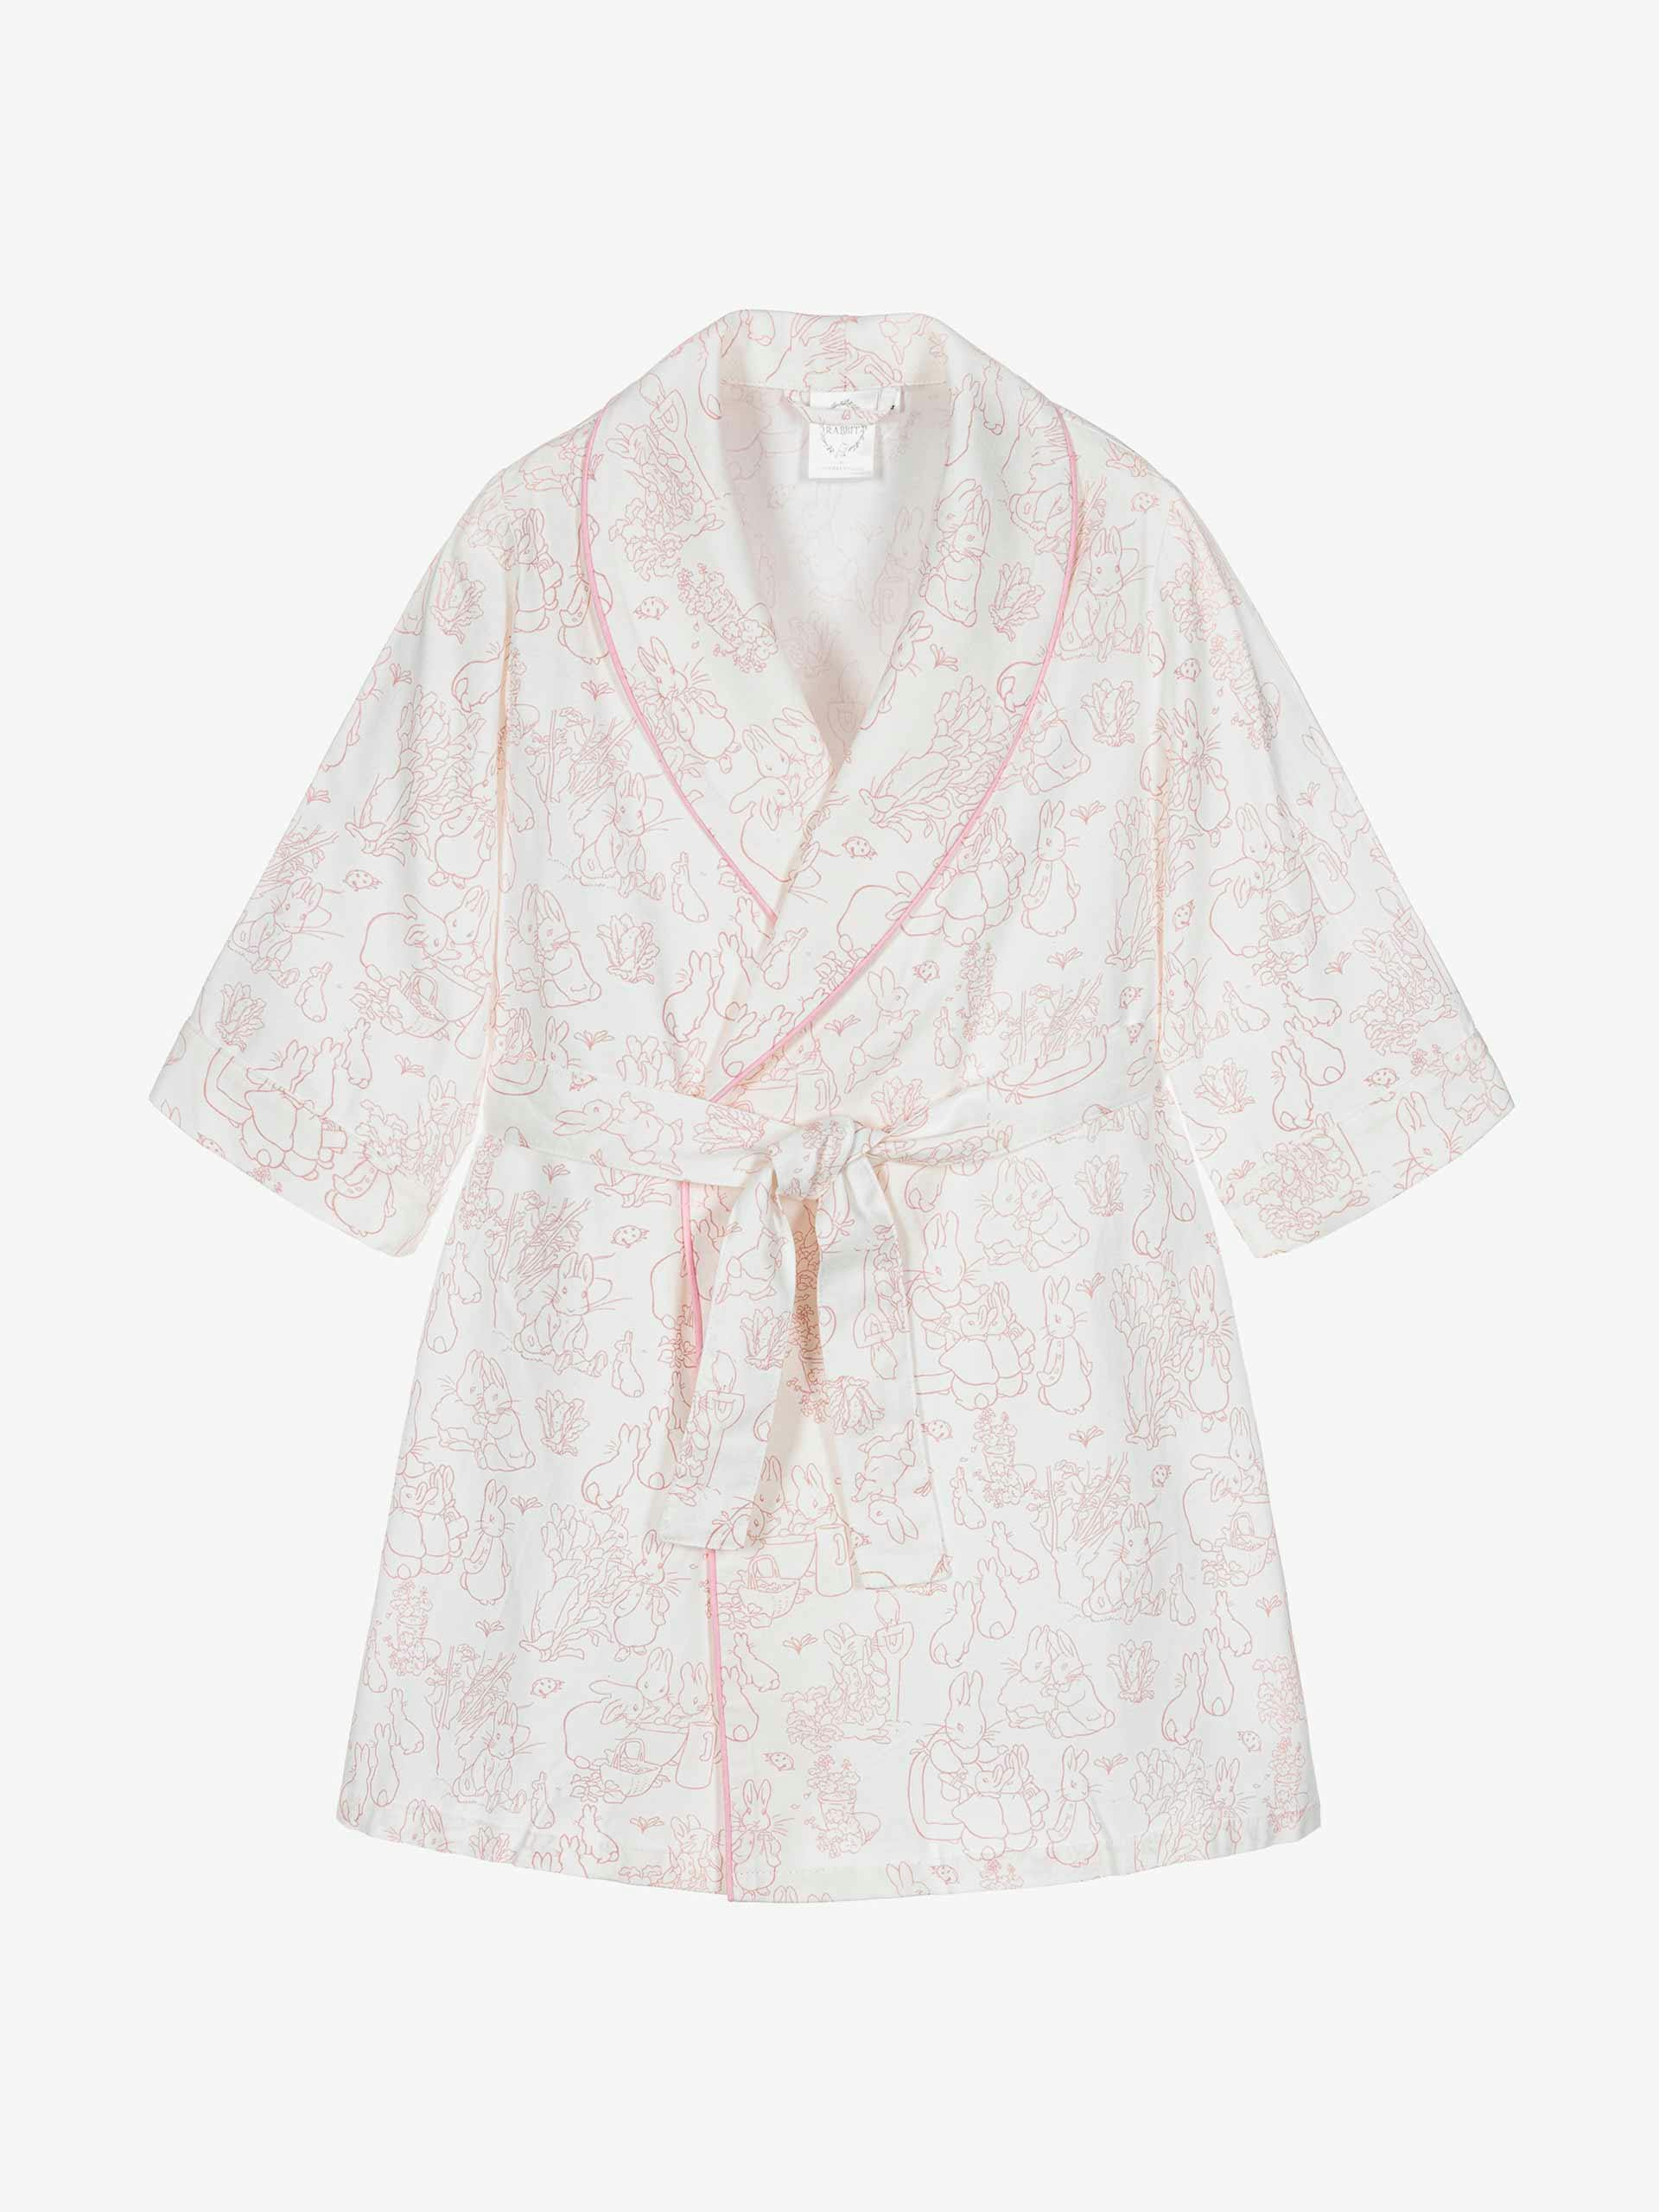 White and pink cotton dressing gown